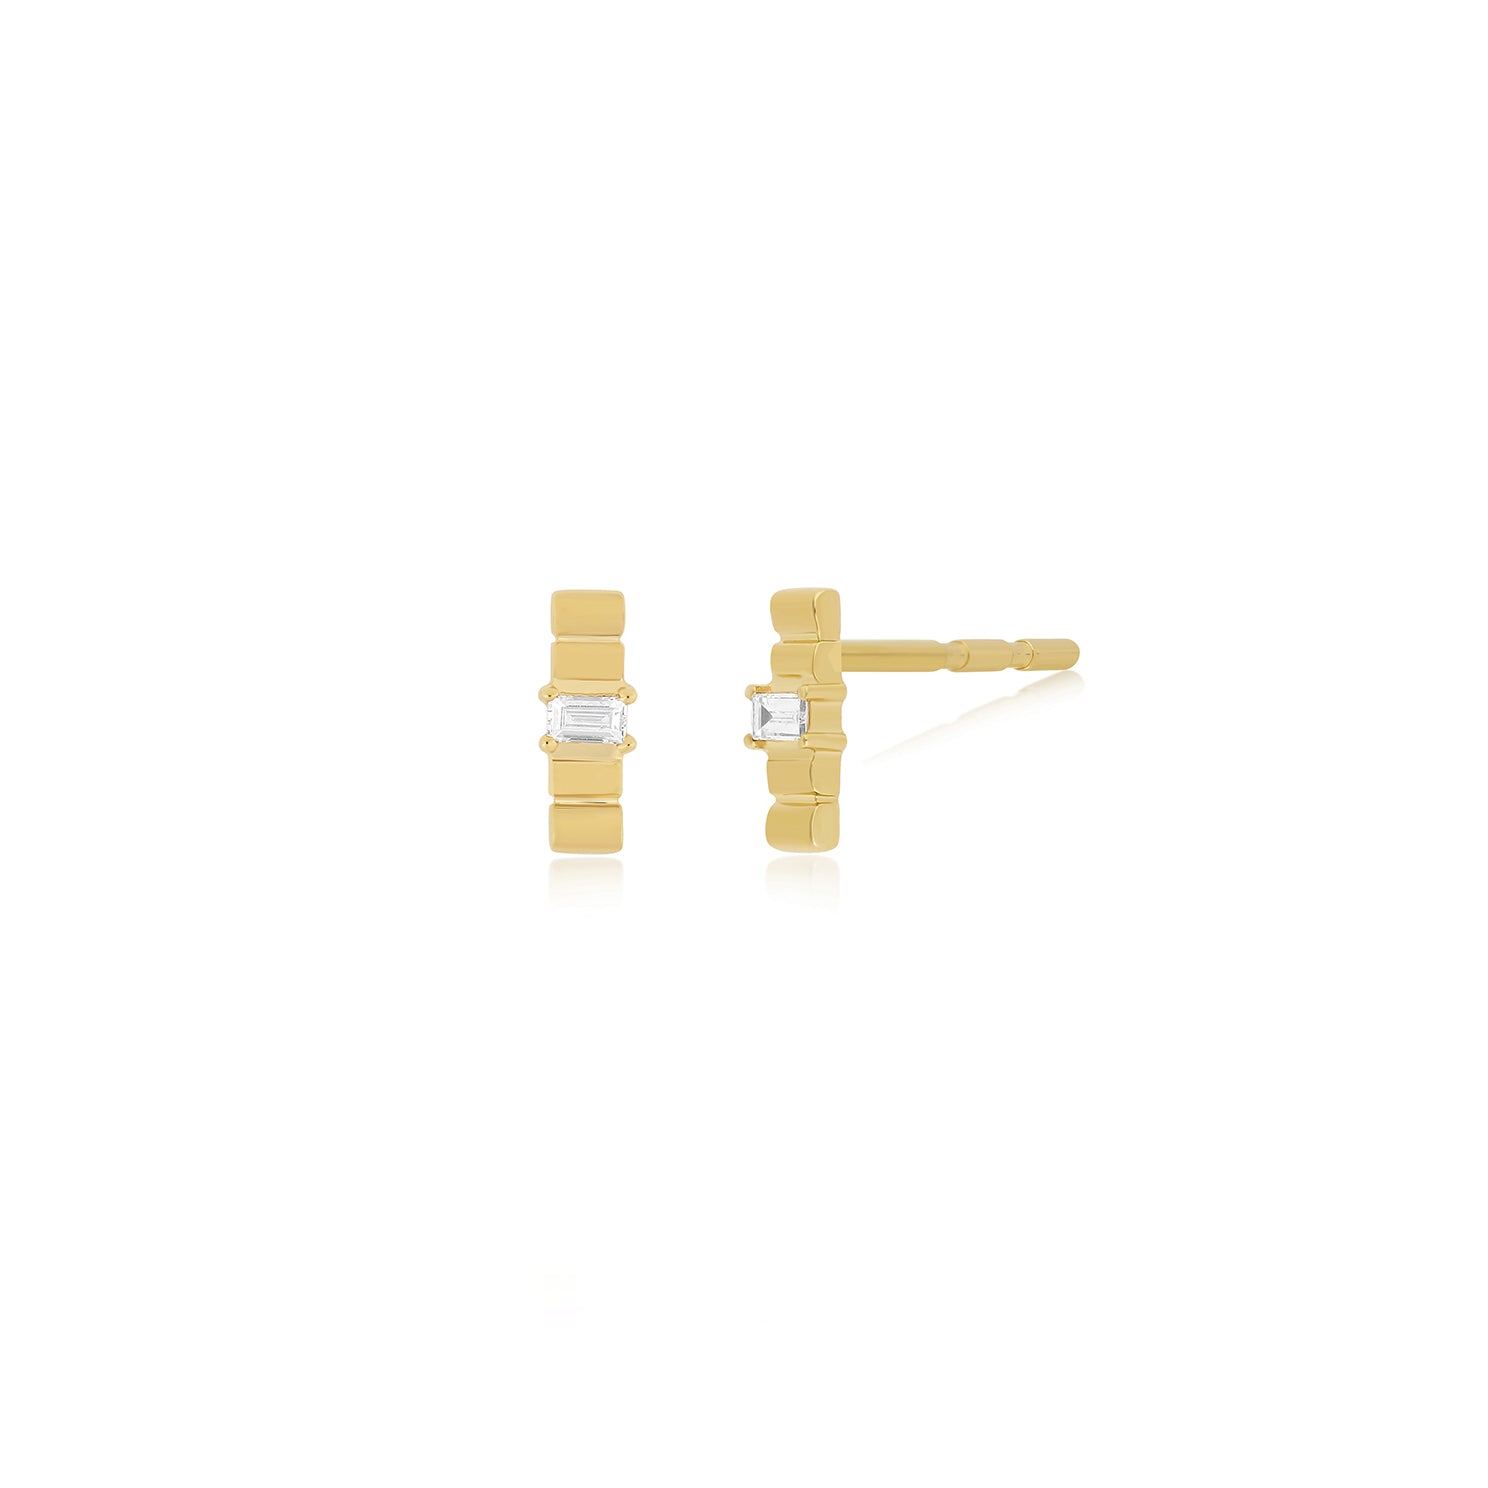 Diamond & Gold Fluted Bar Stud Earring in 14k yellow gold